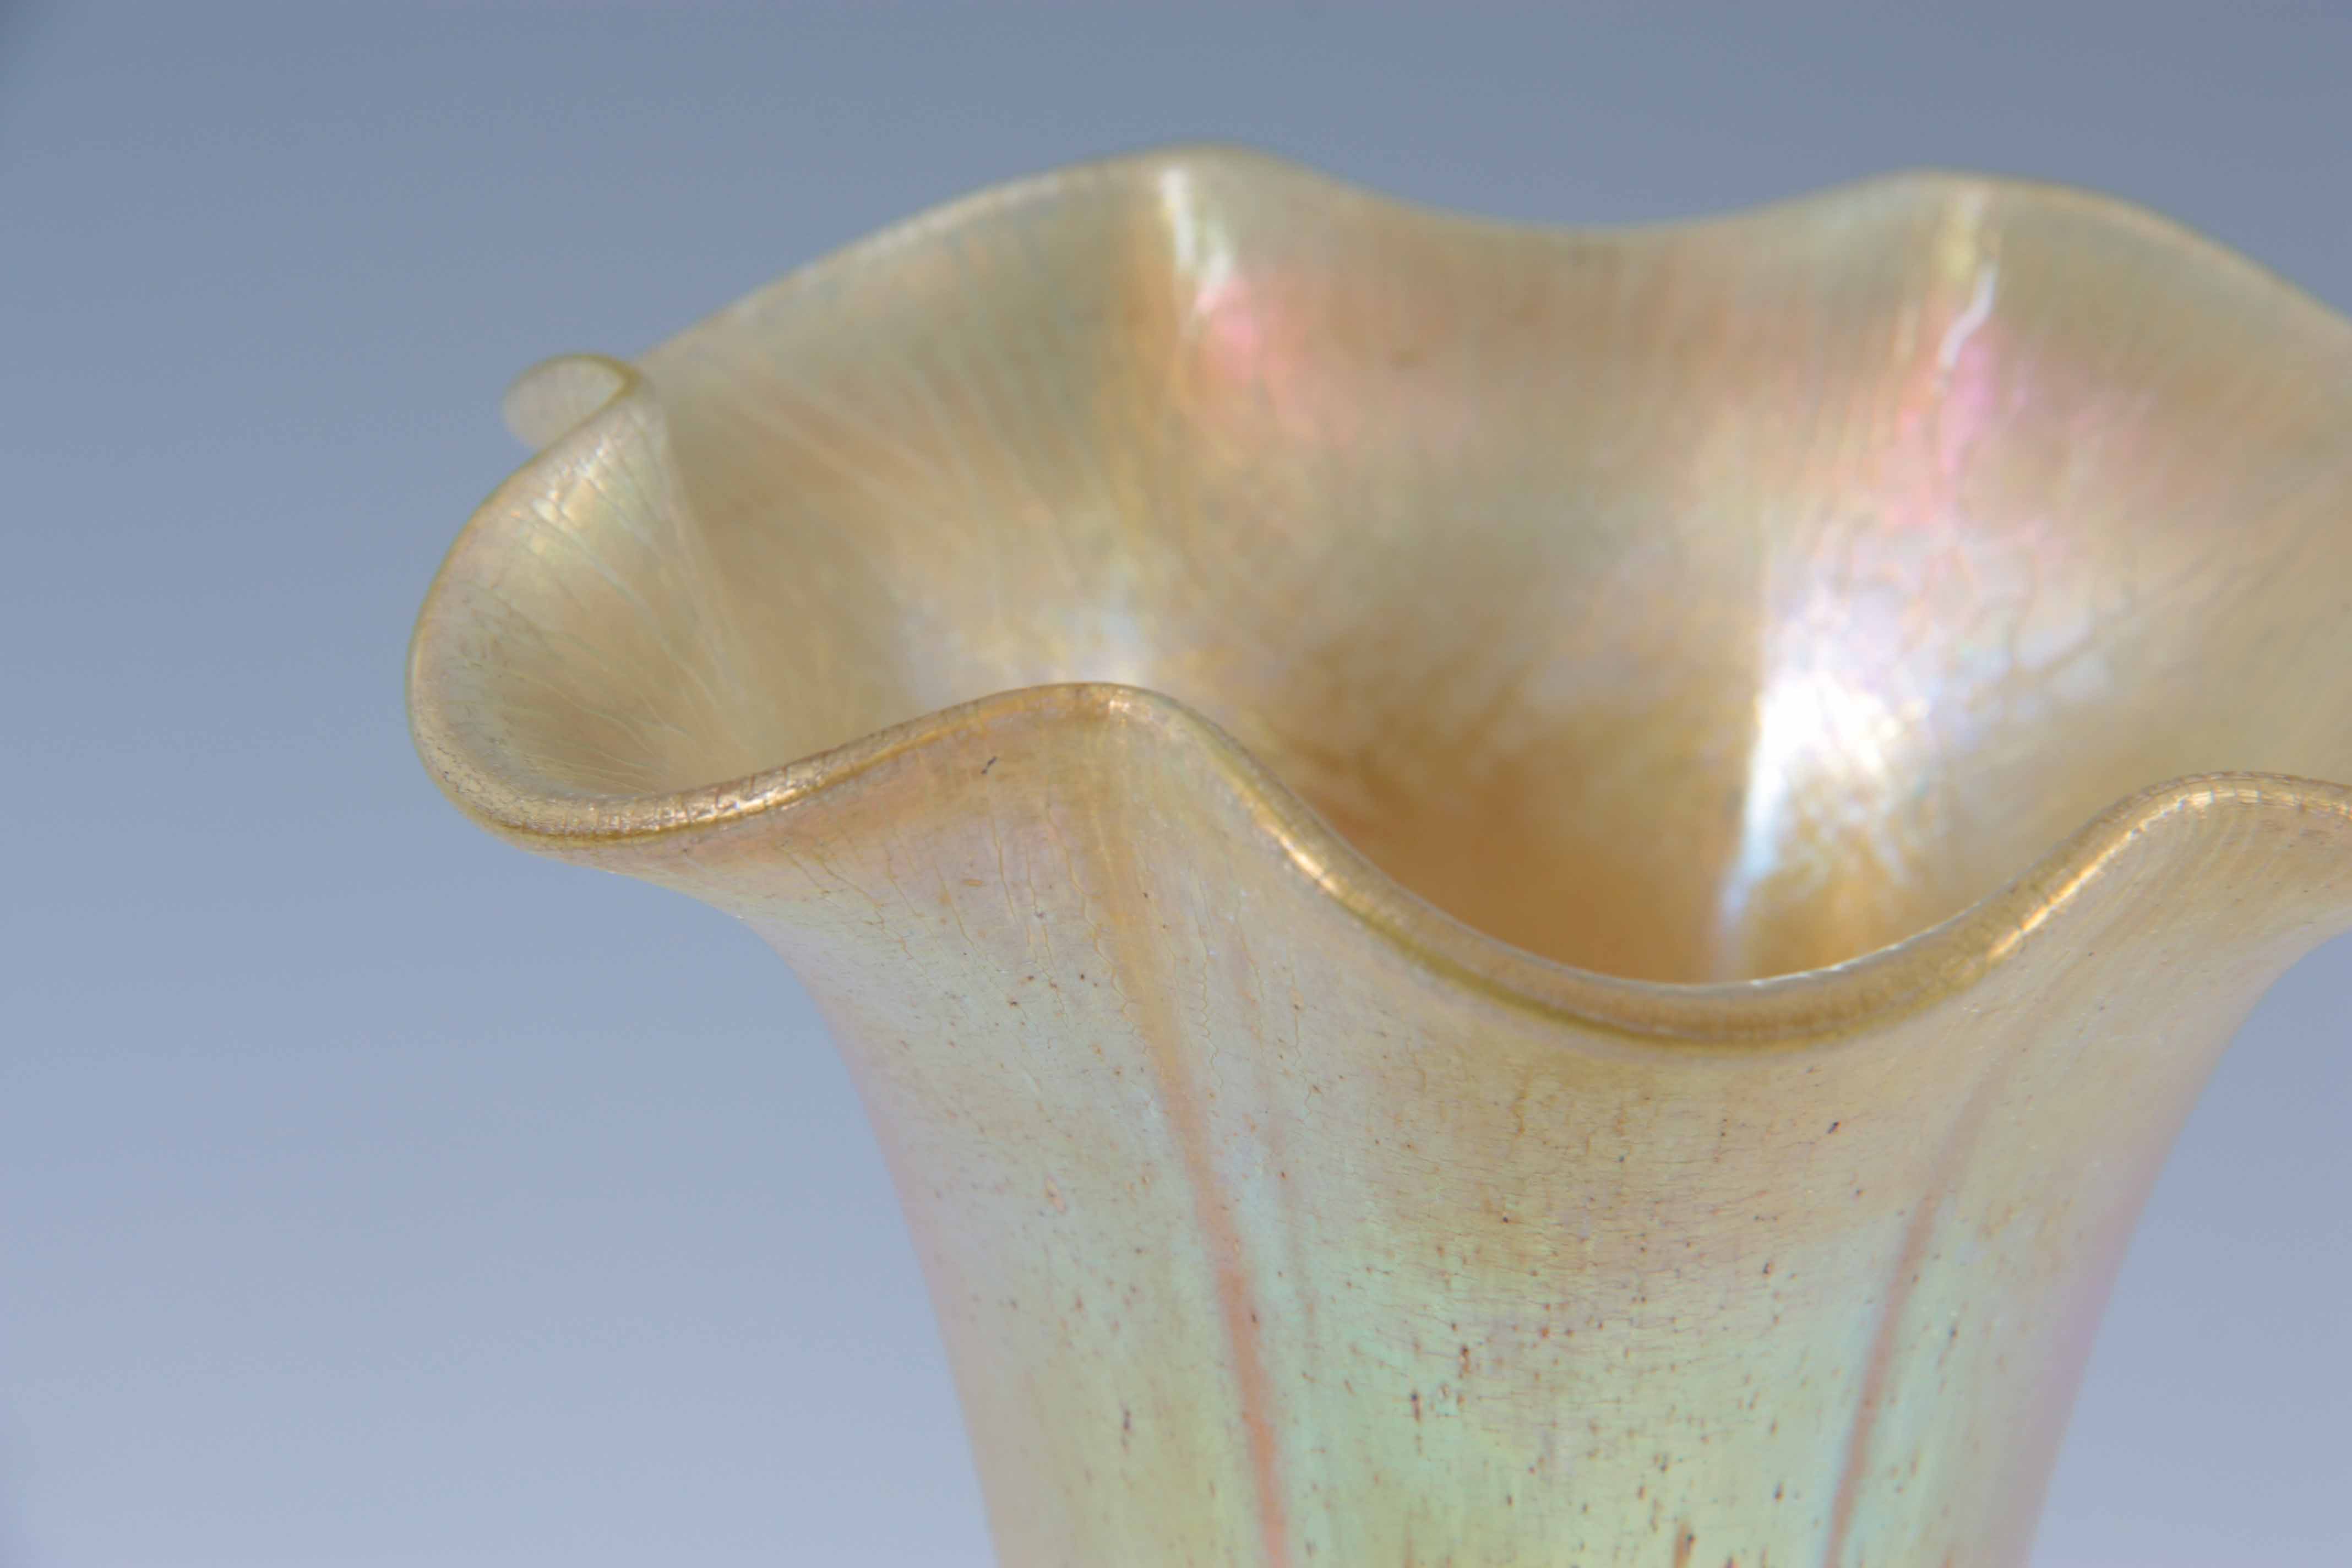 AN EARLY 20TH CENTURY AUSTRIAN IRIDESCENT GOLD COLOURED ART GLASS VASE, possibly Lotez, having - Image 5 of 6